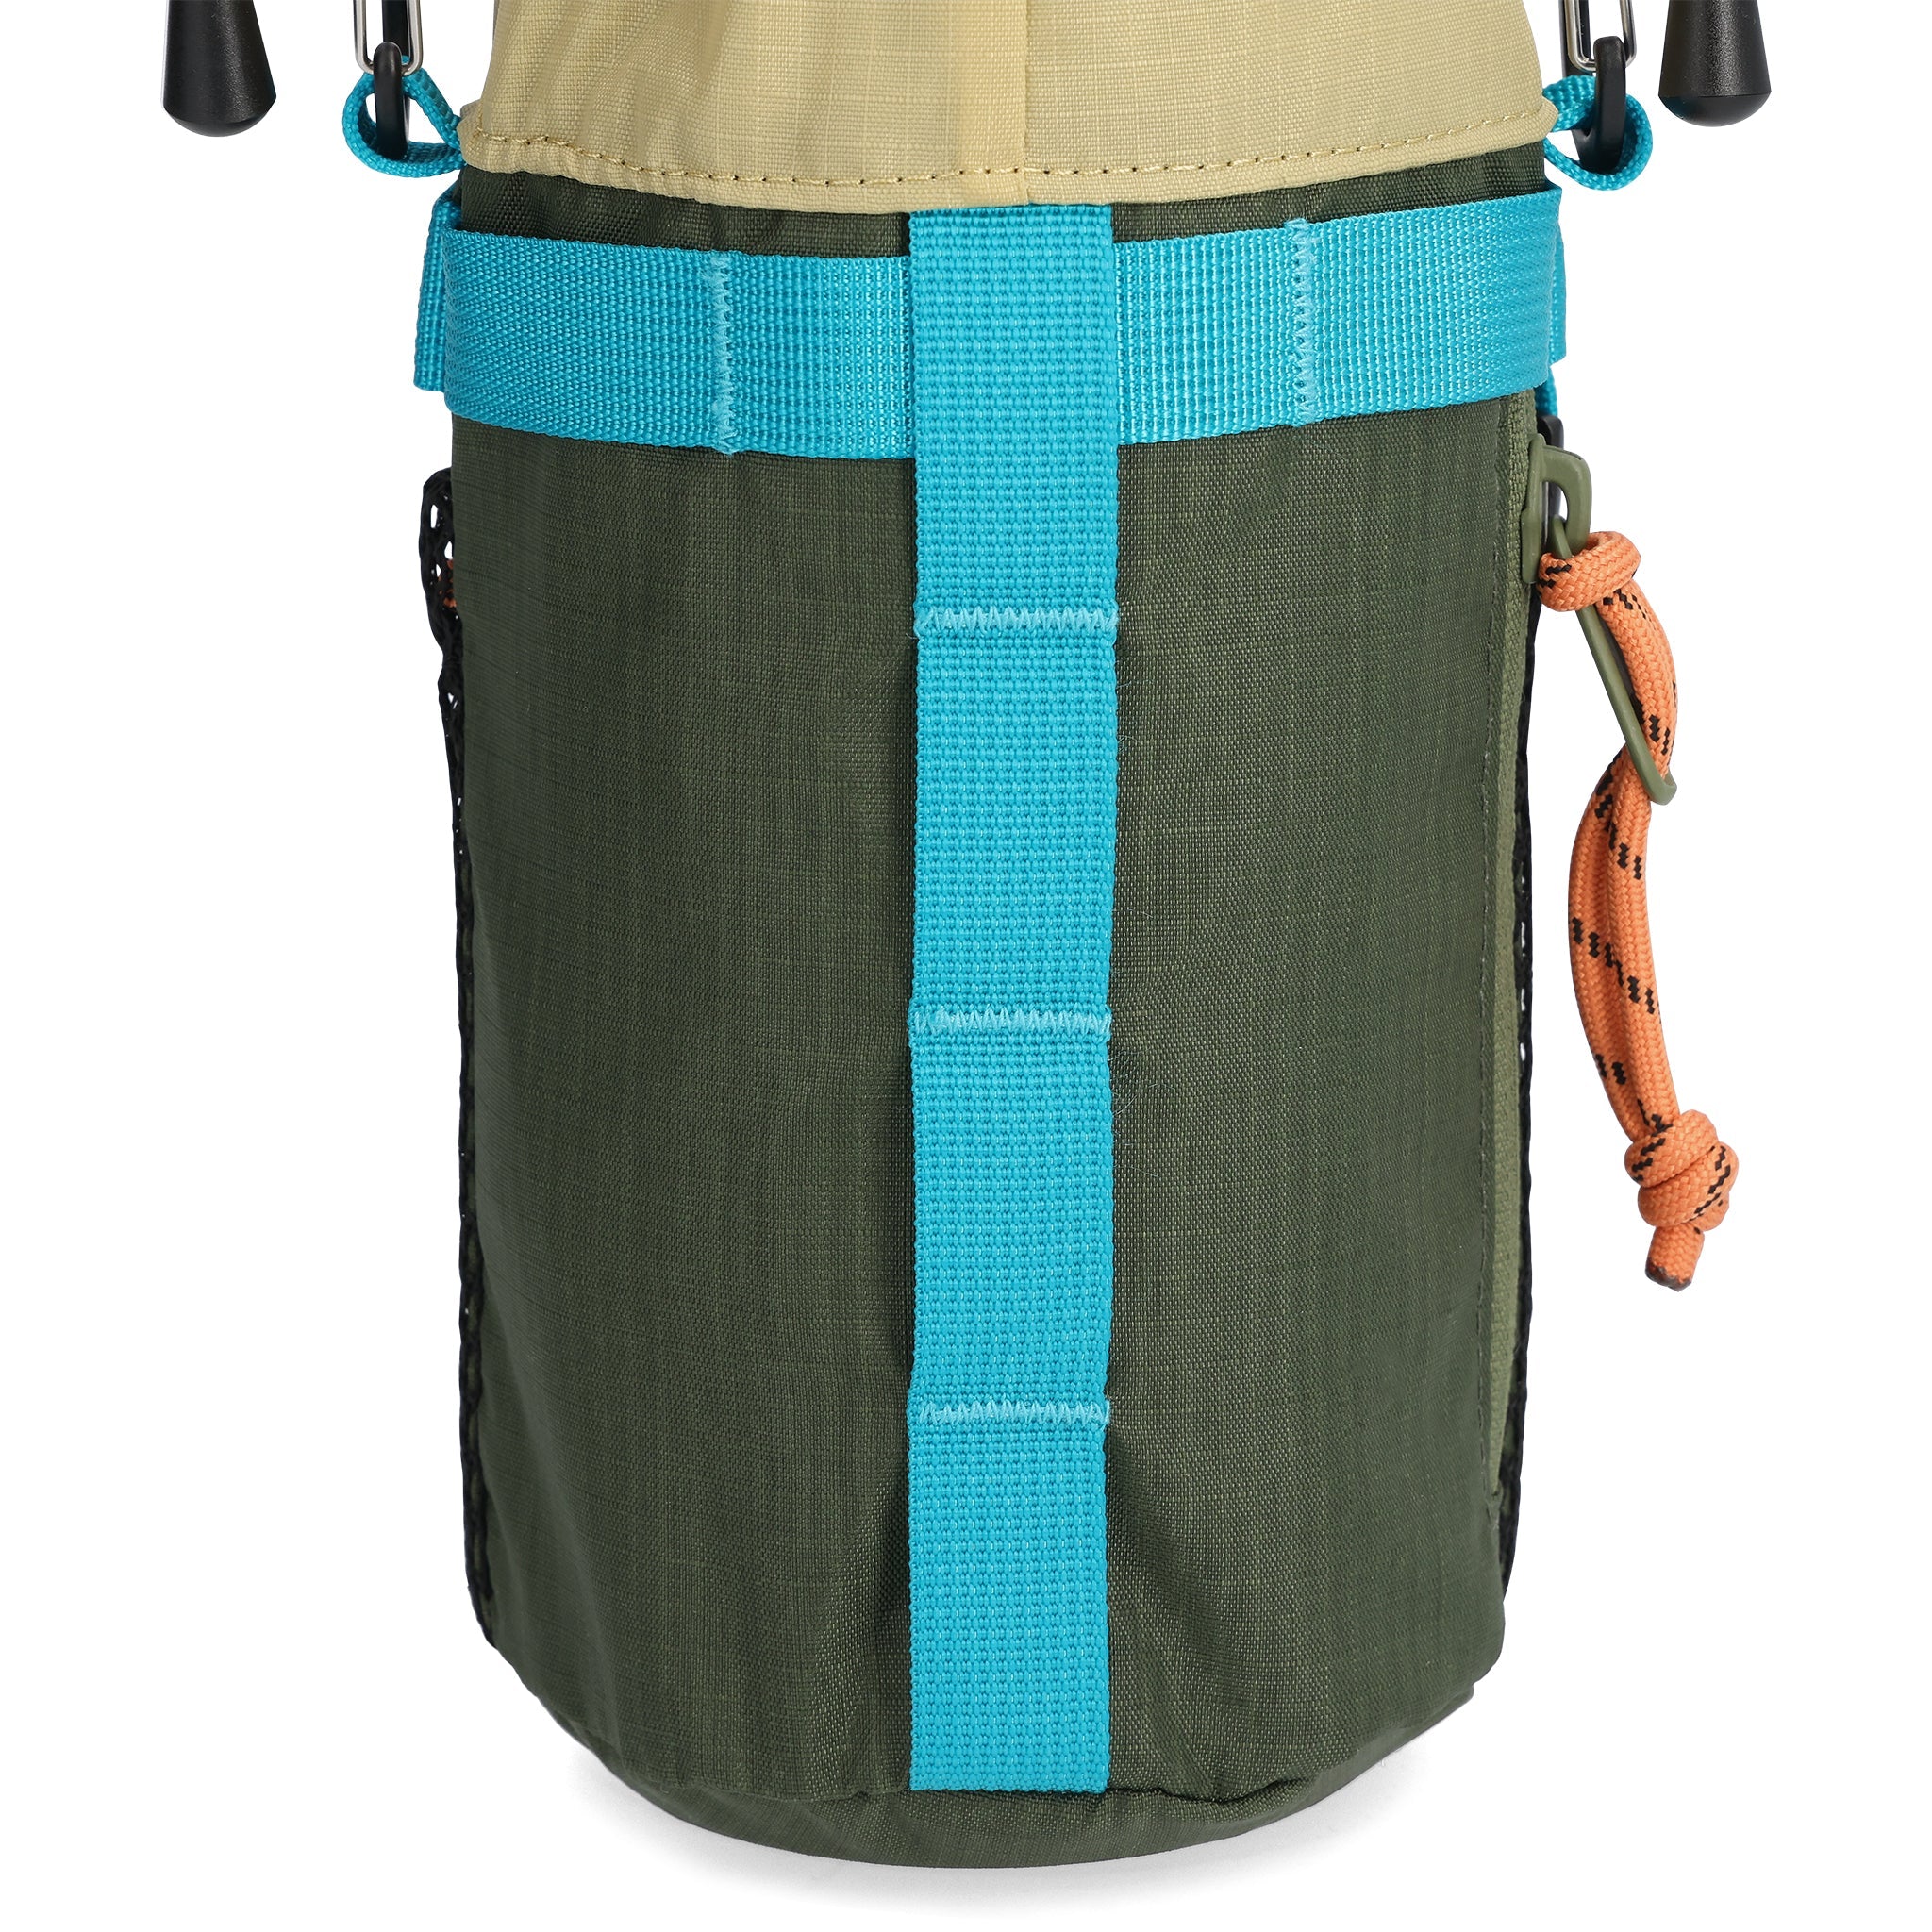 Detail shot of Topo Designs Mountain Hydro Sling in "Olive"